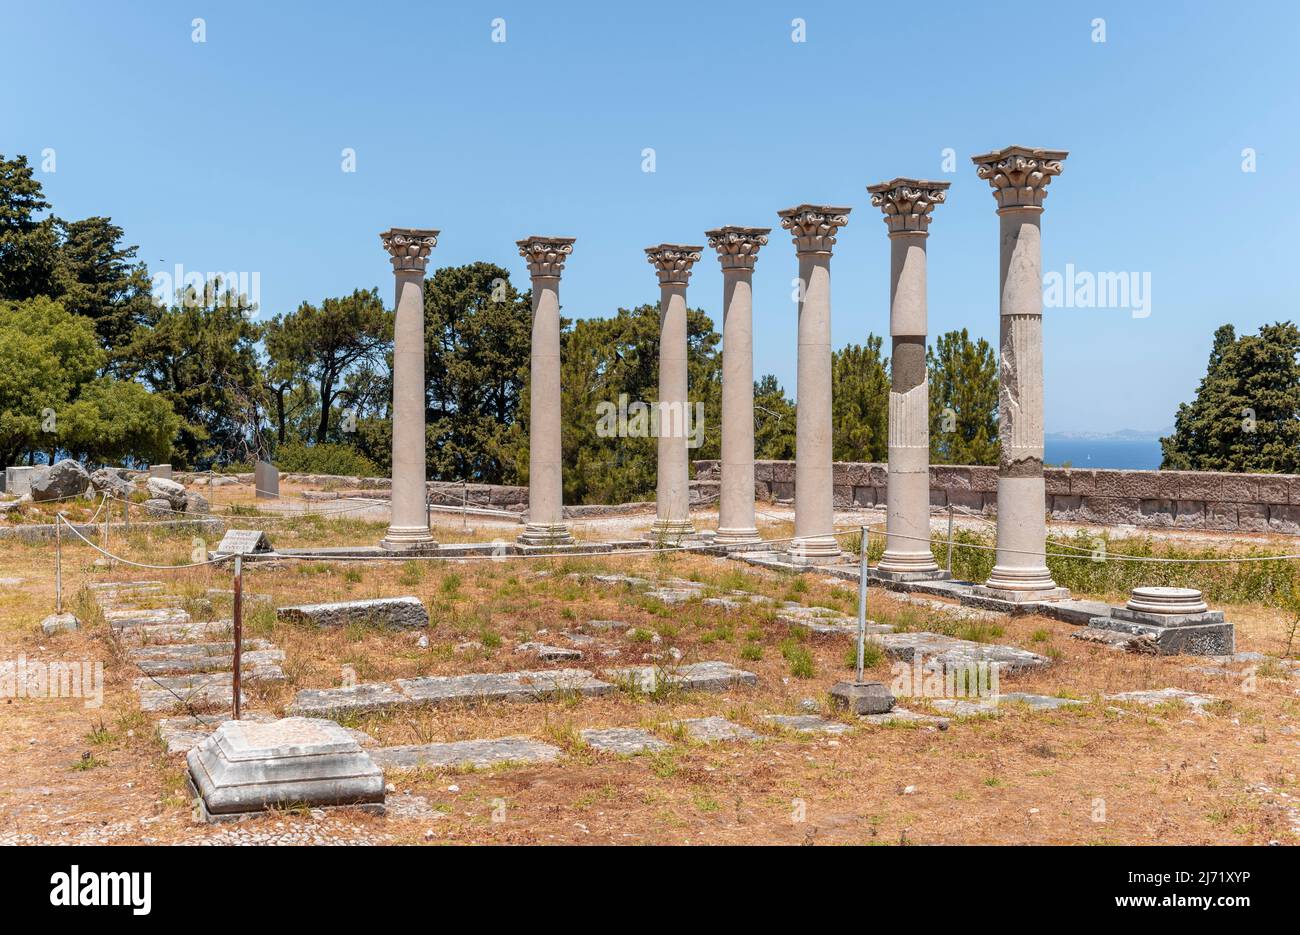 Ruins with columns, Former temple, Asklepieion, Kos, Dodecanese, Greece Stock Photo